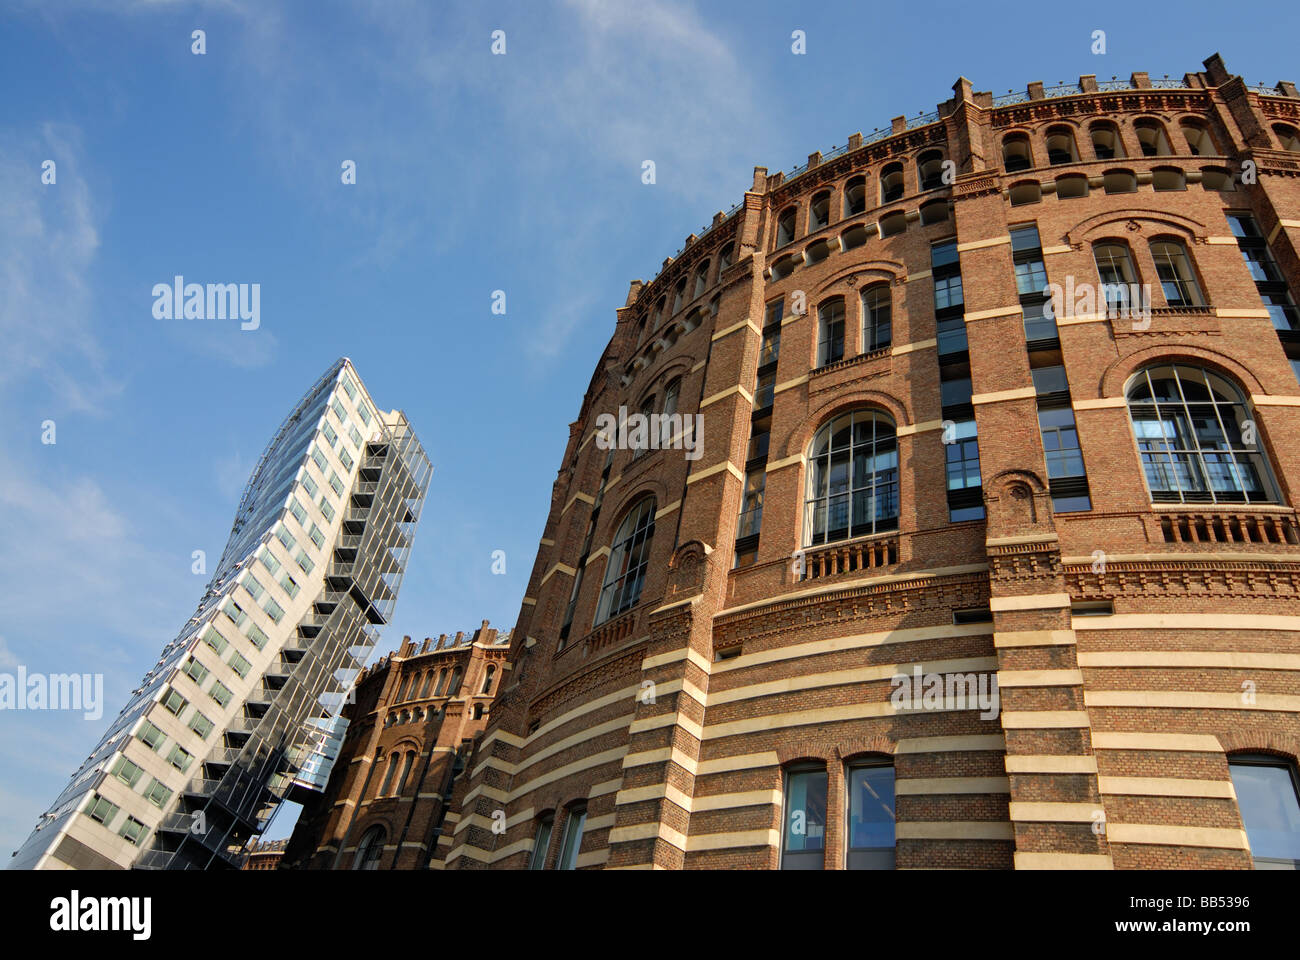 Renovated Historic Gasometers A and B in Simmering Vienna Austria Stock Photo